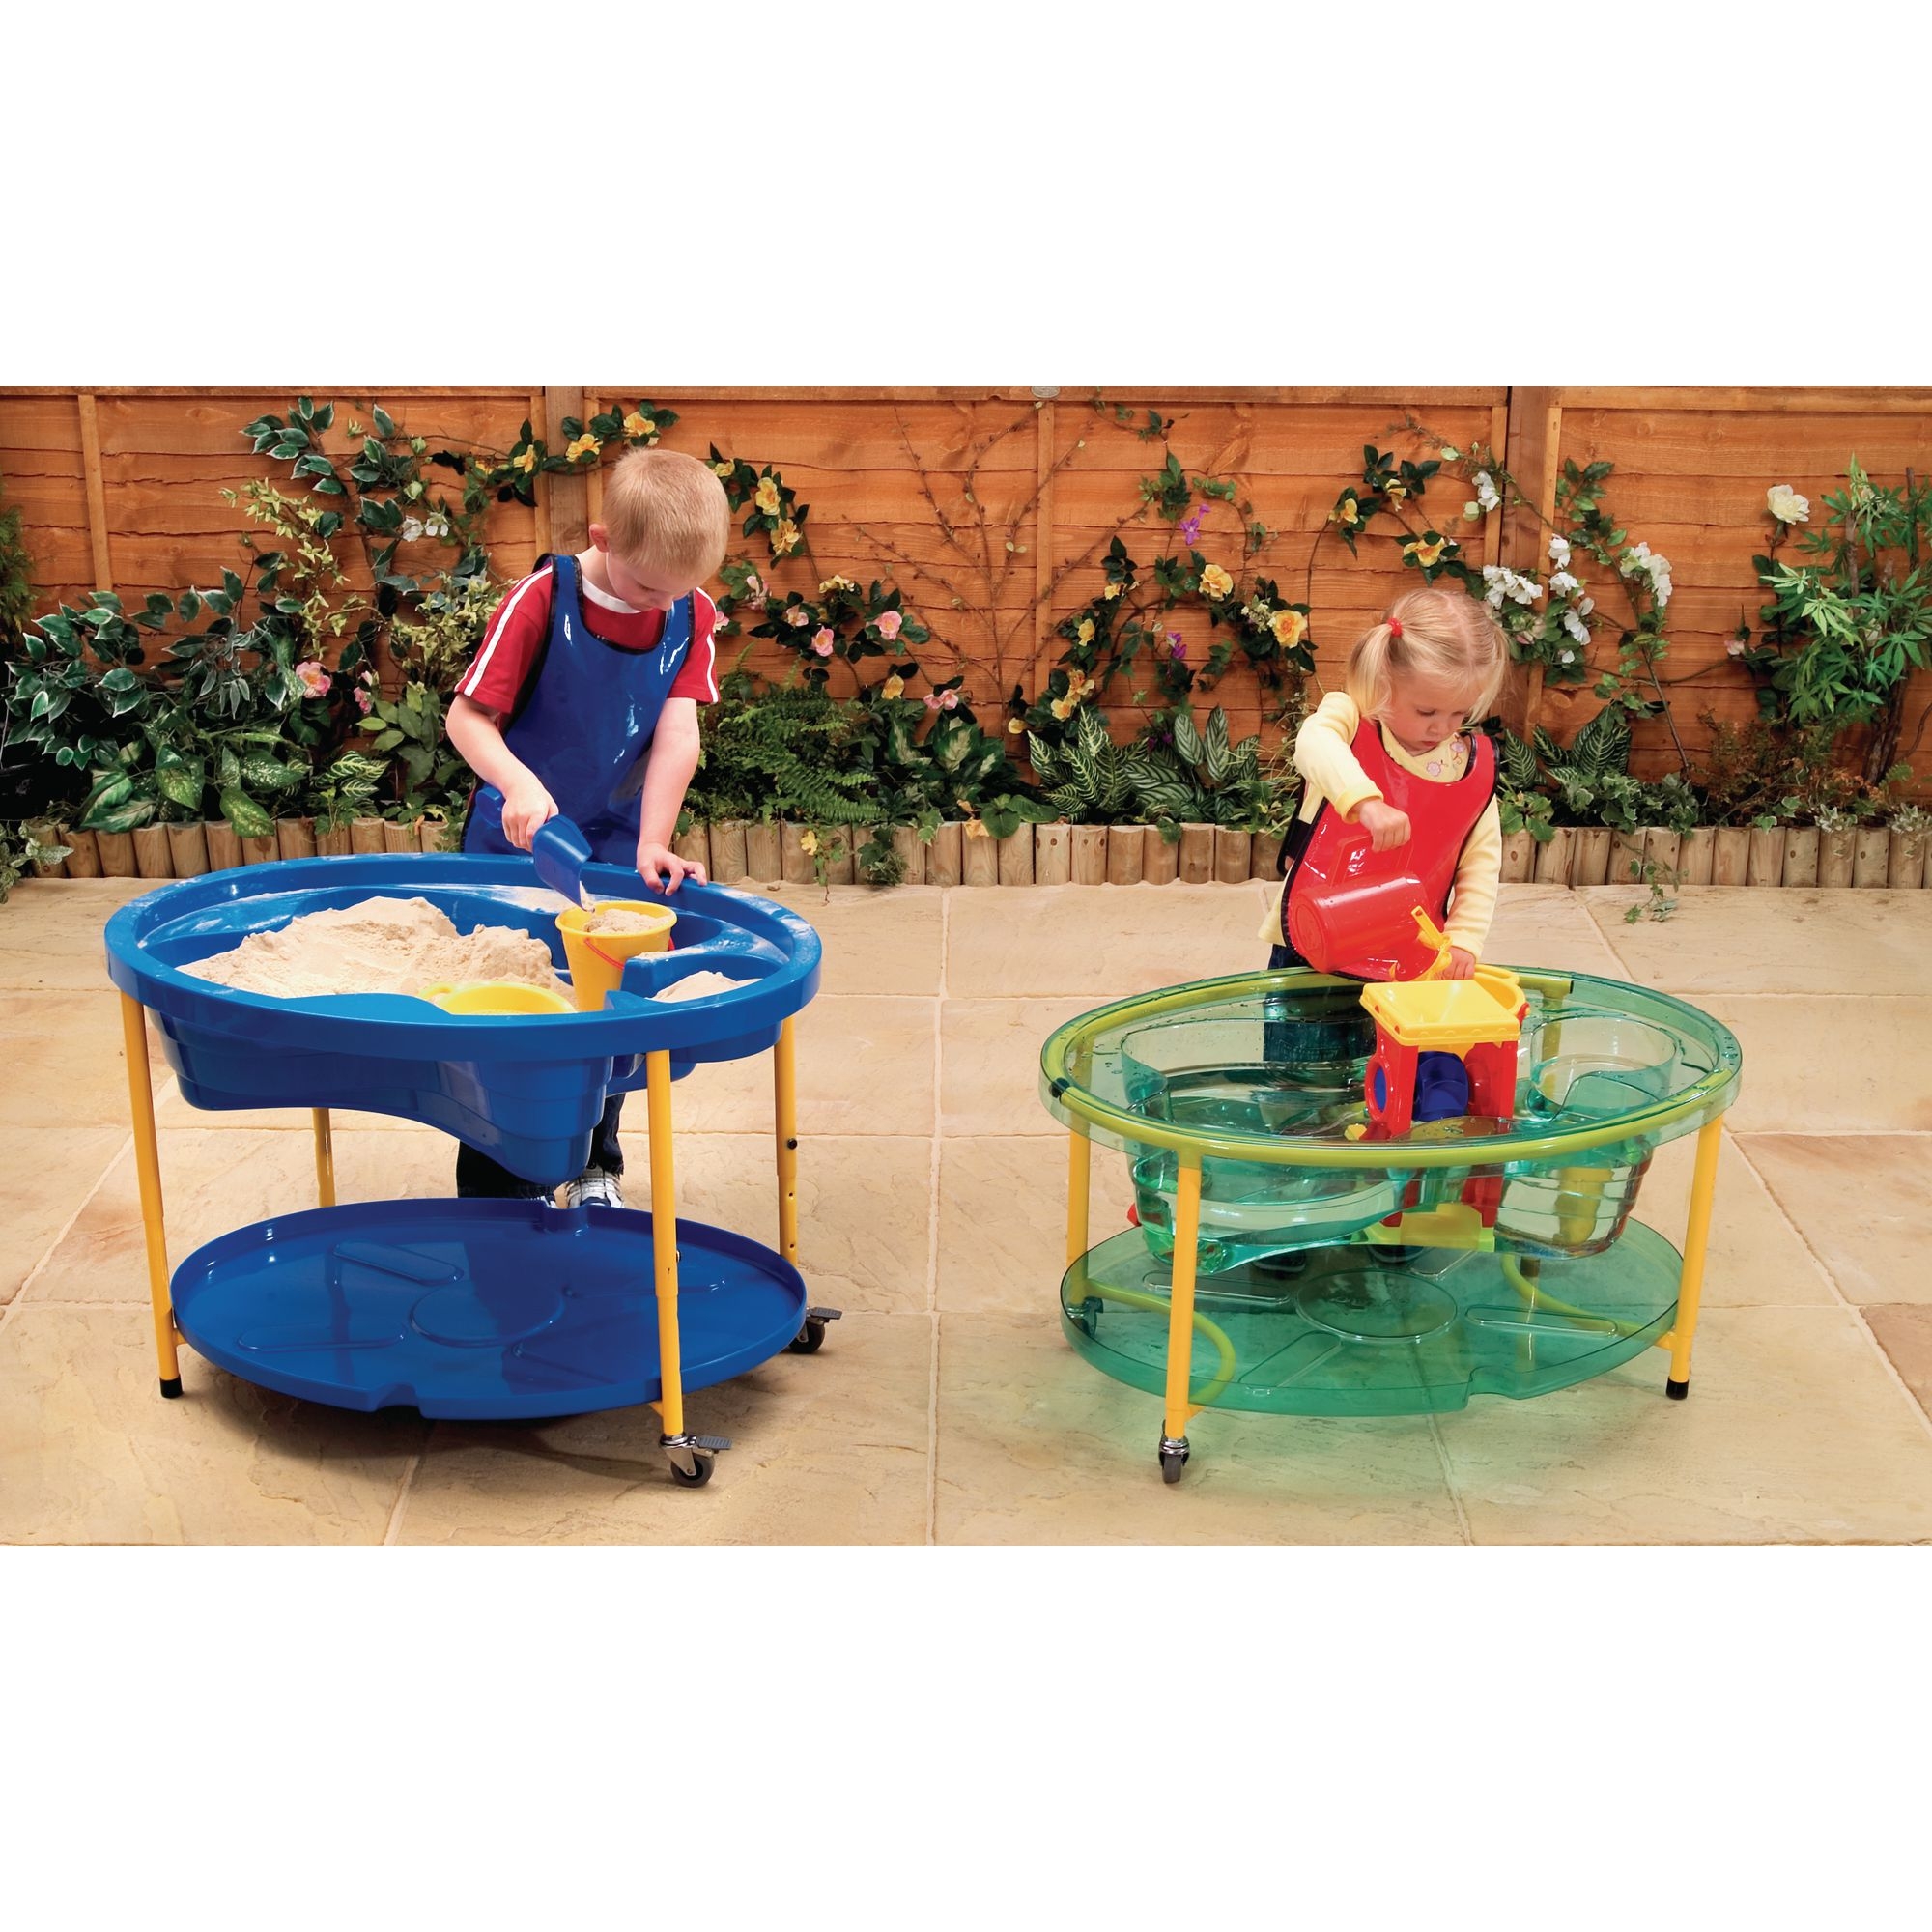 Adjustable Sand and Water Play Tables - Blue